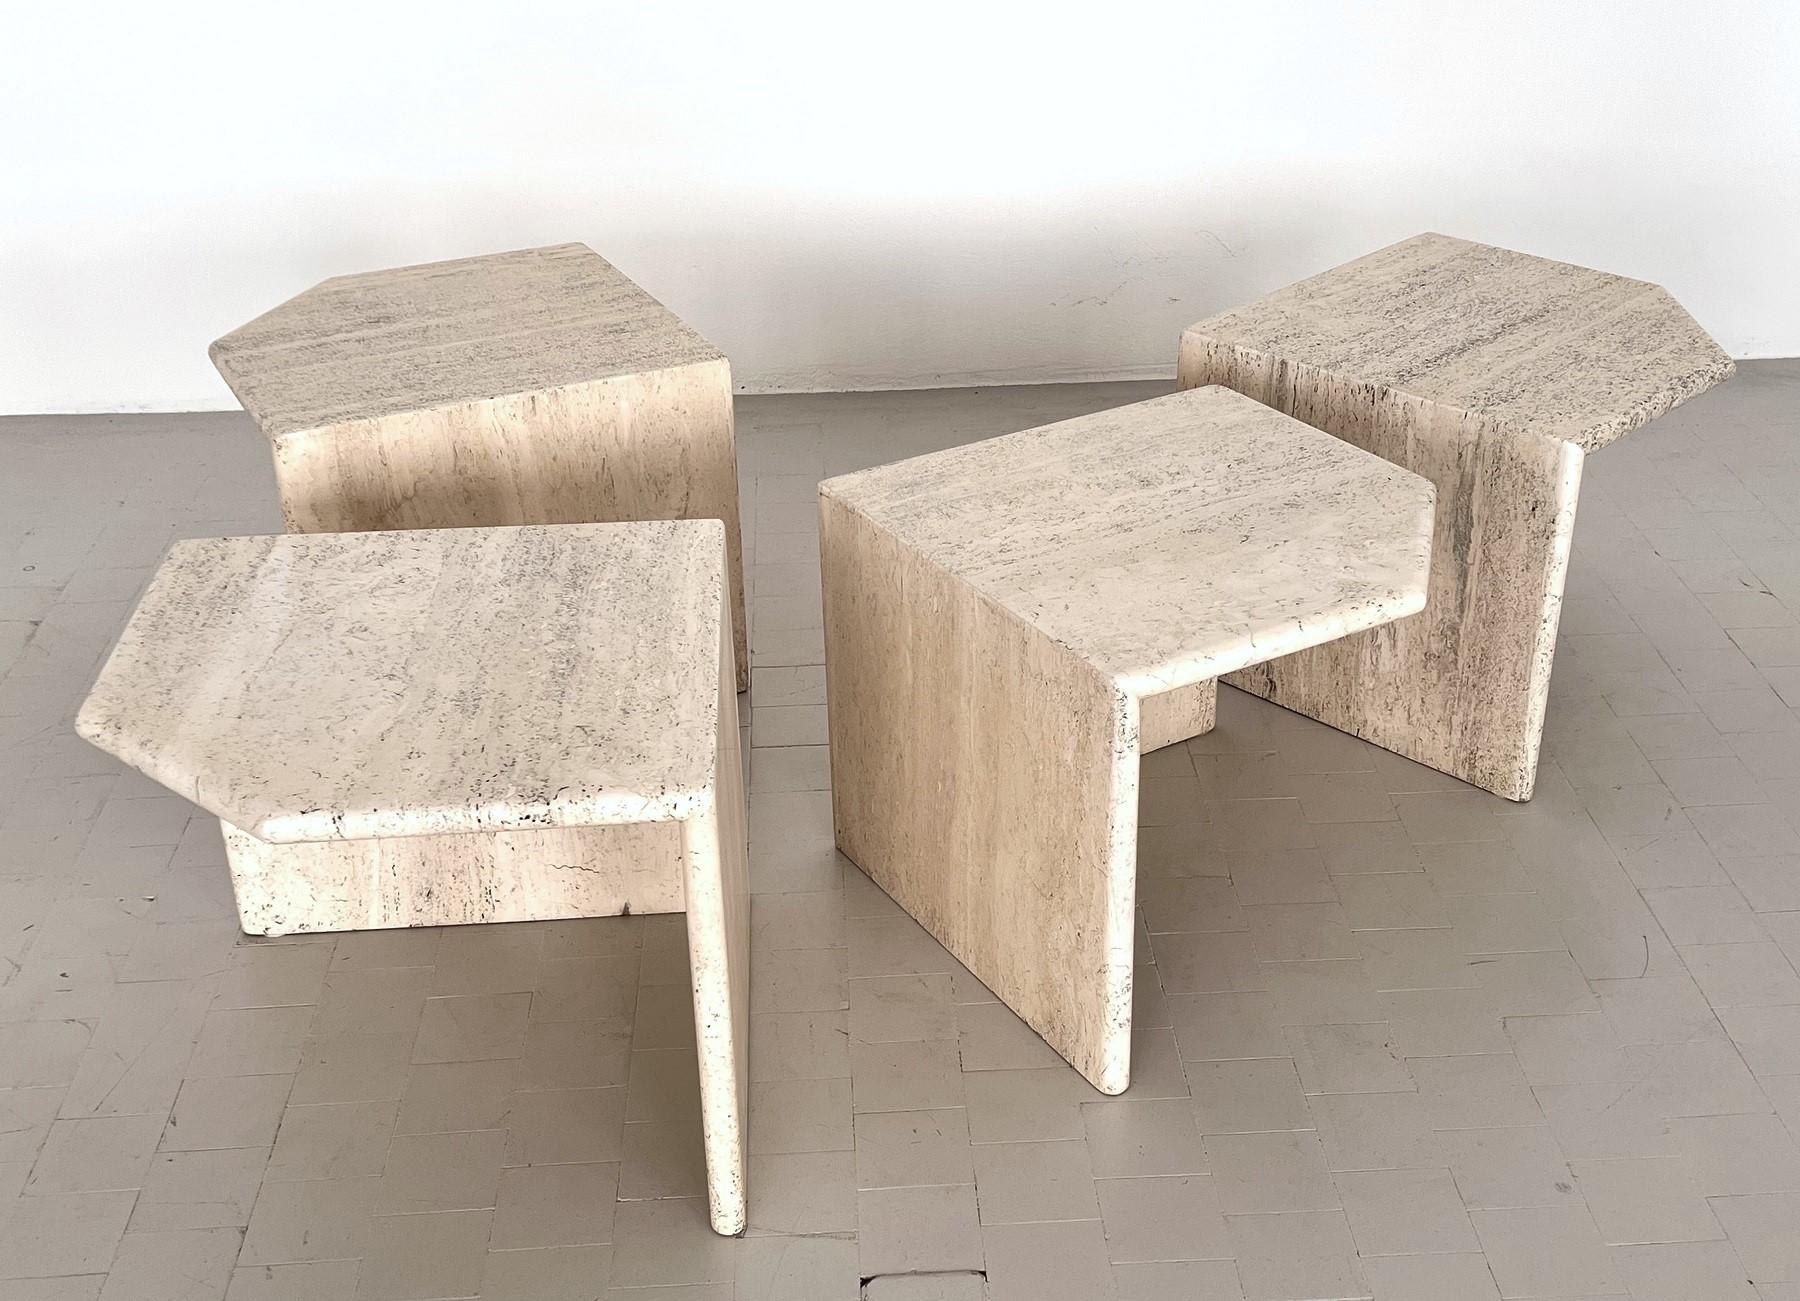 Late 20th Century Italian Midcentury Sectional Travertine Marble Coffee Table of Four Pieces, 1970